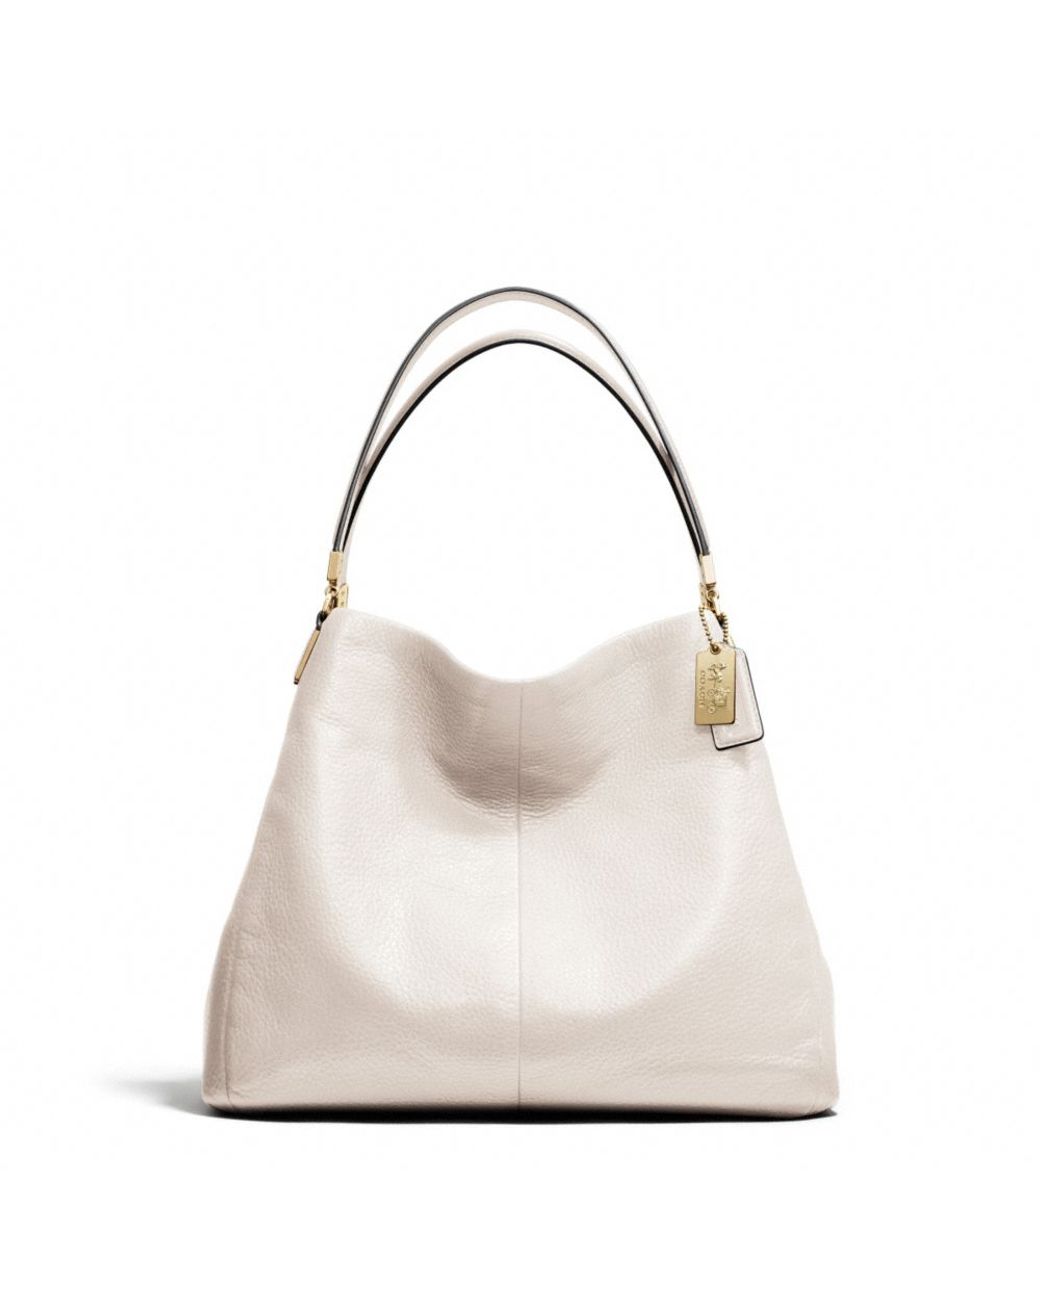 COACH Madison Small Phoebe Shoulder Bag in Leather in White | Lyst